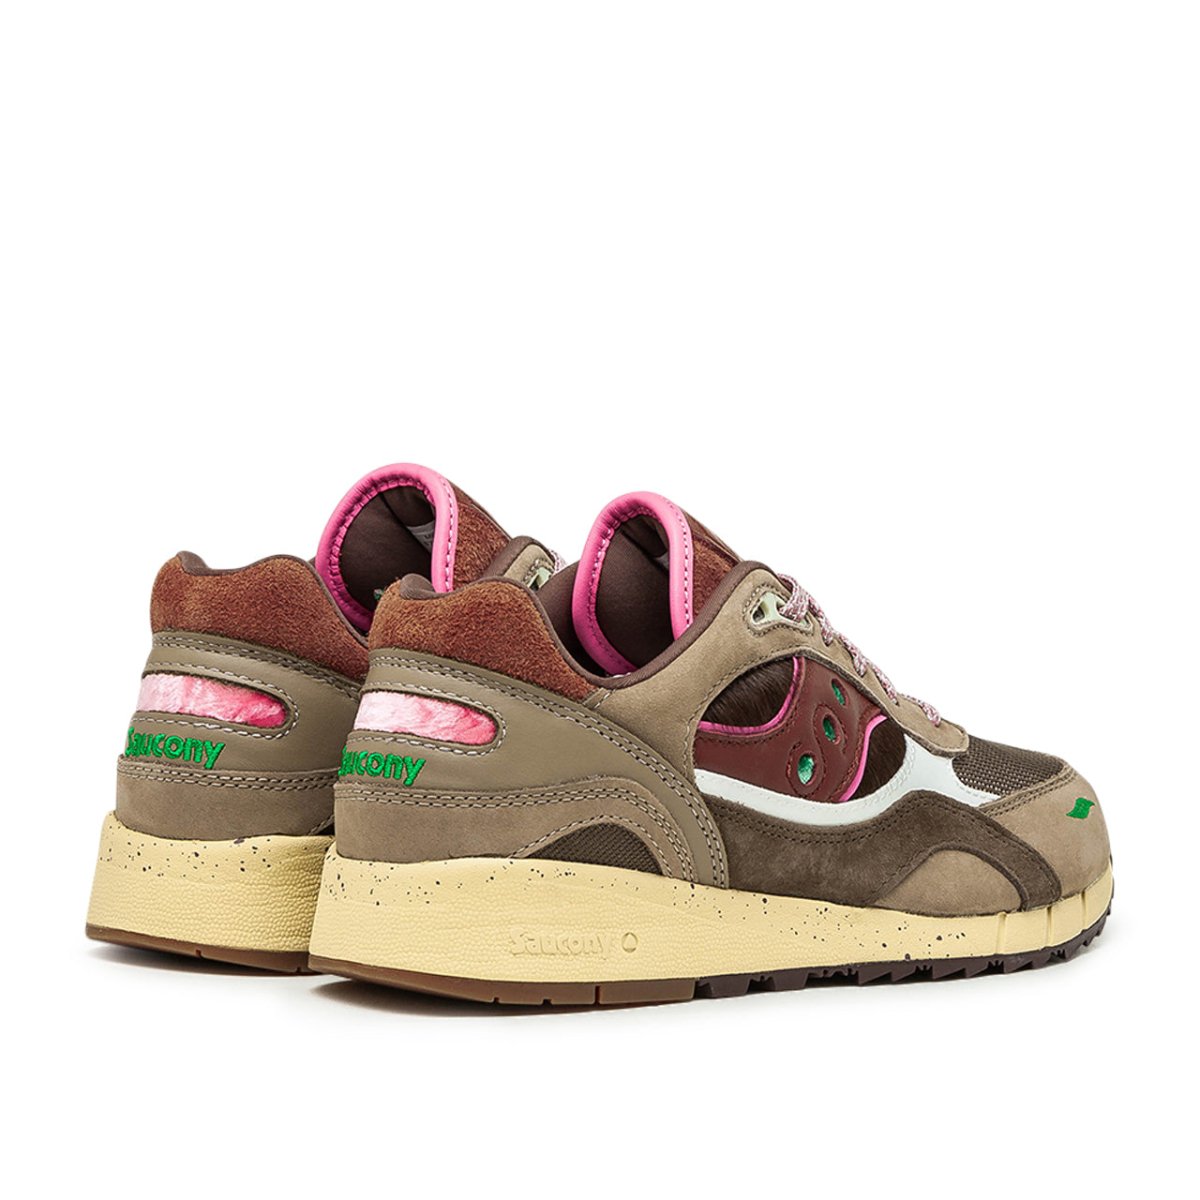 Saucony x Feature Shadow 6000 'Chocolate Chip' (Braun / Rot)  - Allike Store